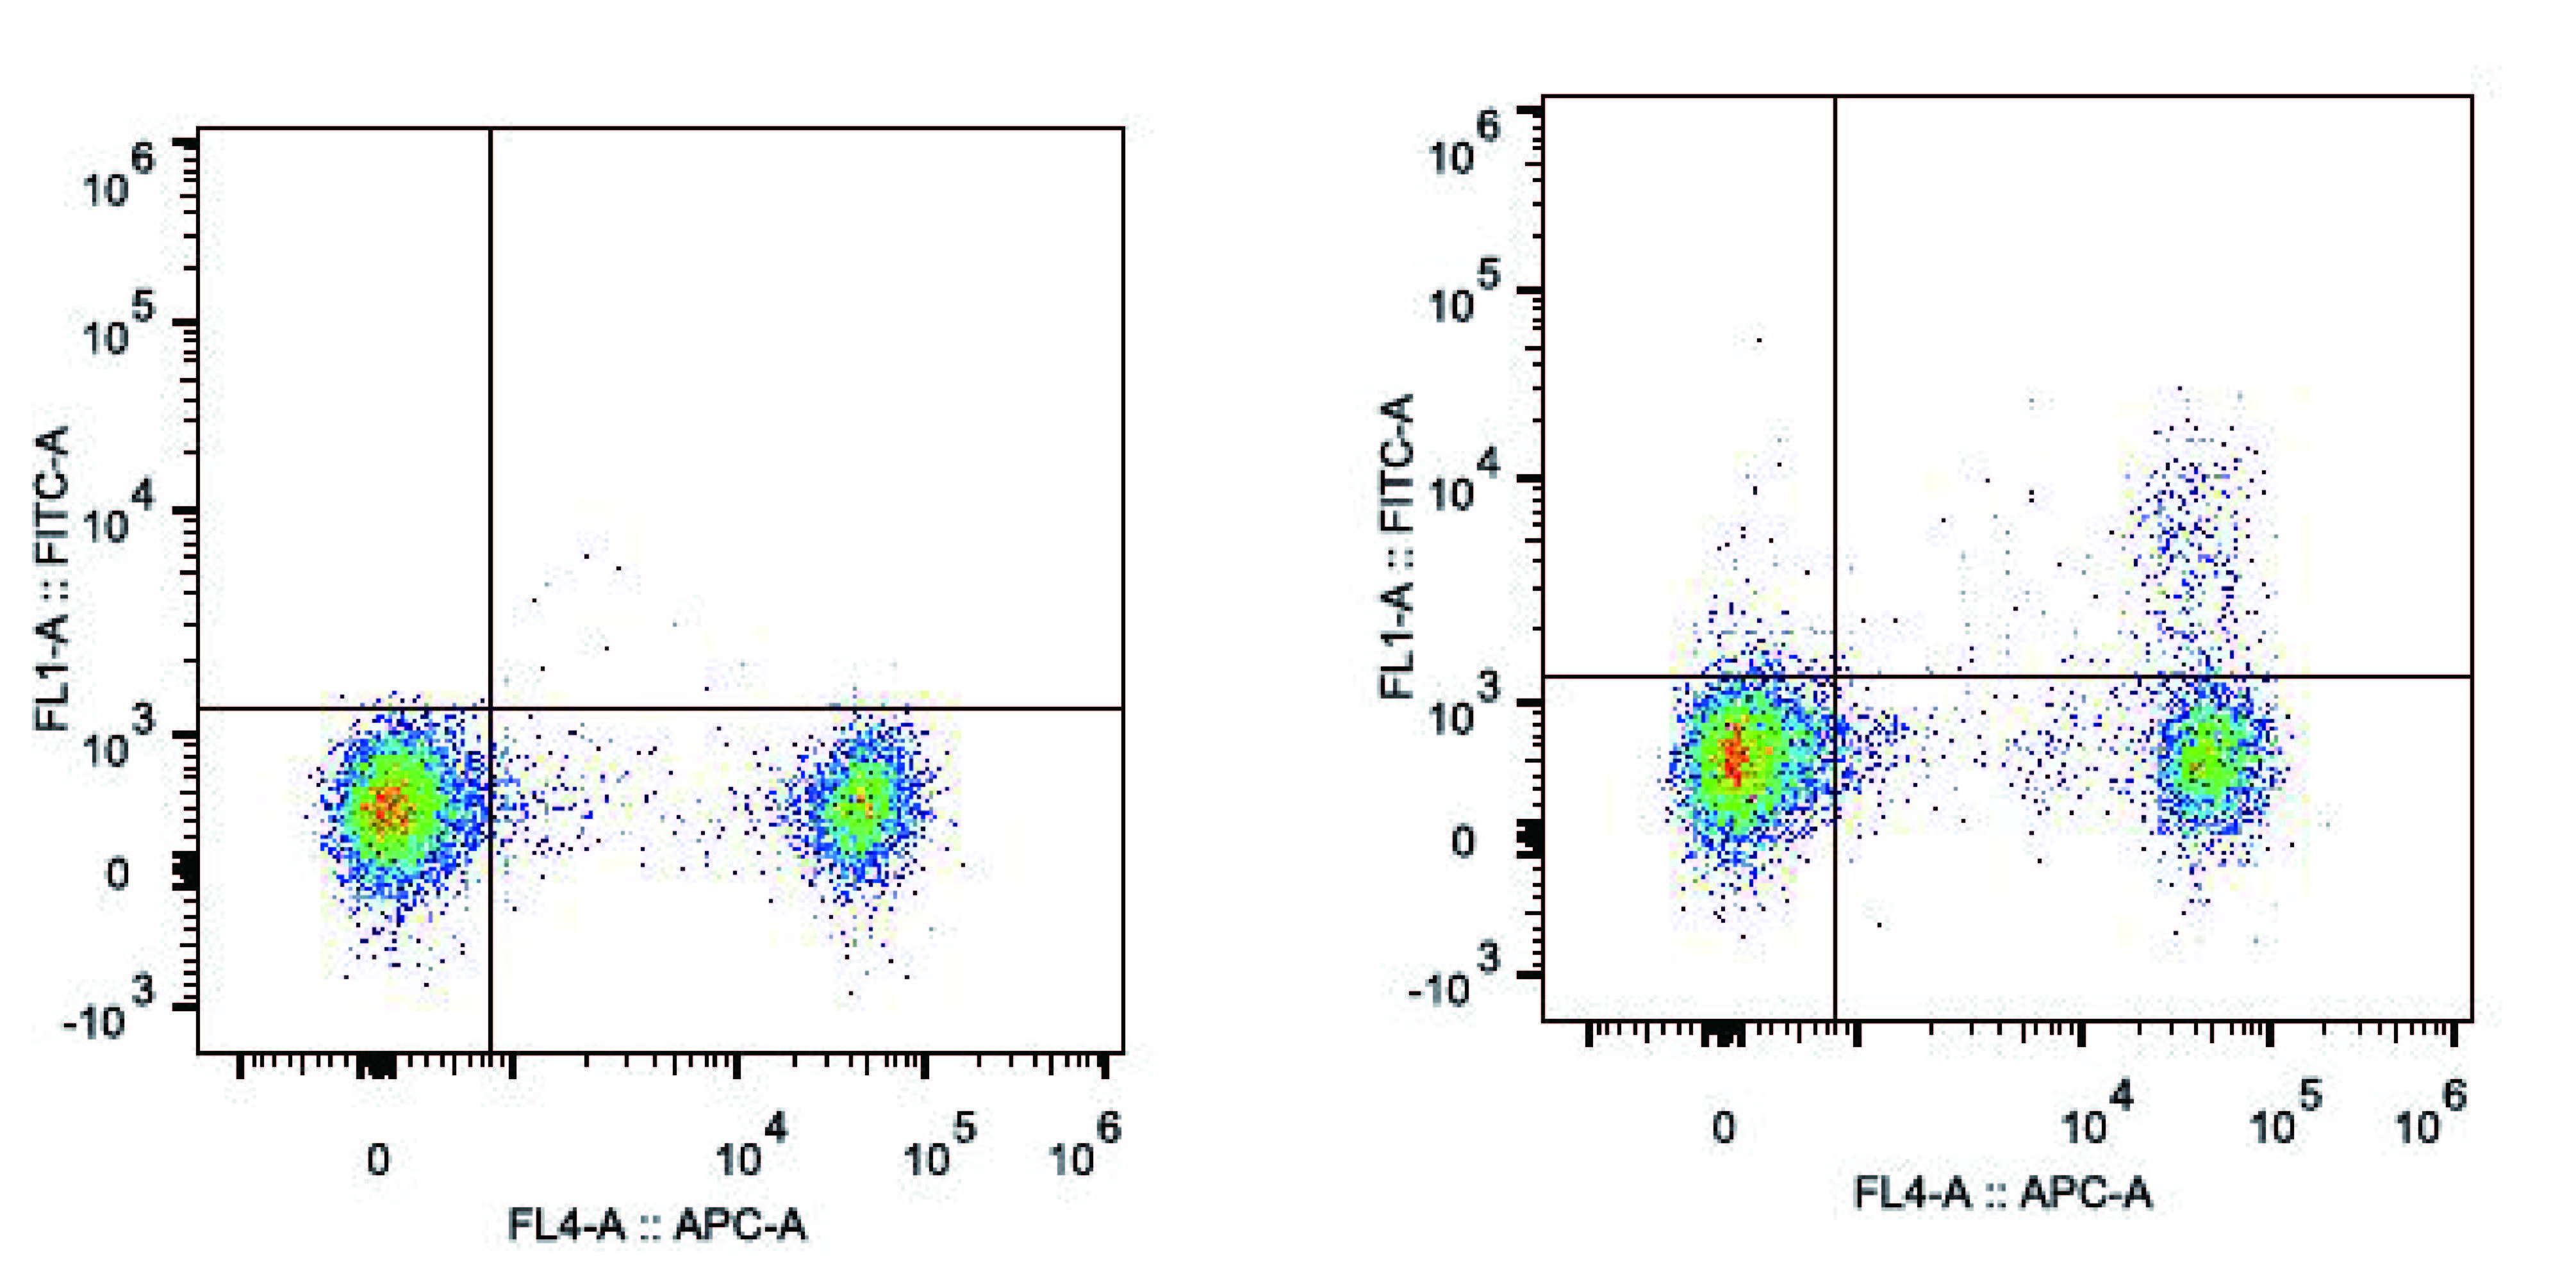 C57BL/6 murine splenocytes are stained with Anti-Mouse CD25 Monoclonal Antibody(AF488 Conjugated) and Anti-Mouse CD4 Monoclonal Antibody(APC Conjugated)(right)). Splenocytes stained with Anti-Mouse CD4 Monoclonal Antibody(APC Conjugated)(left) are used as control.